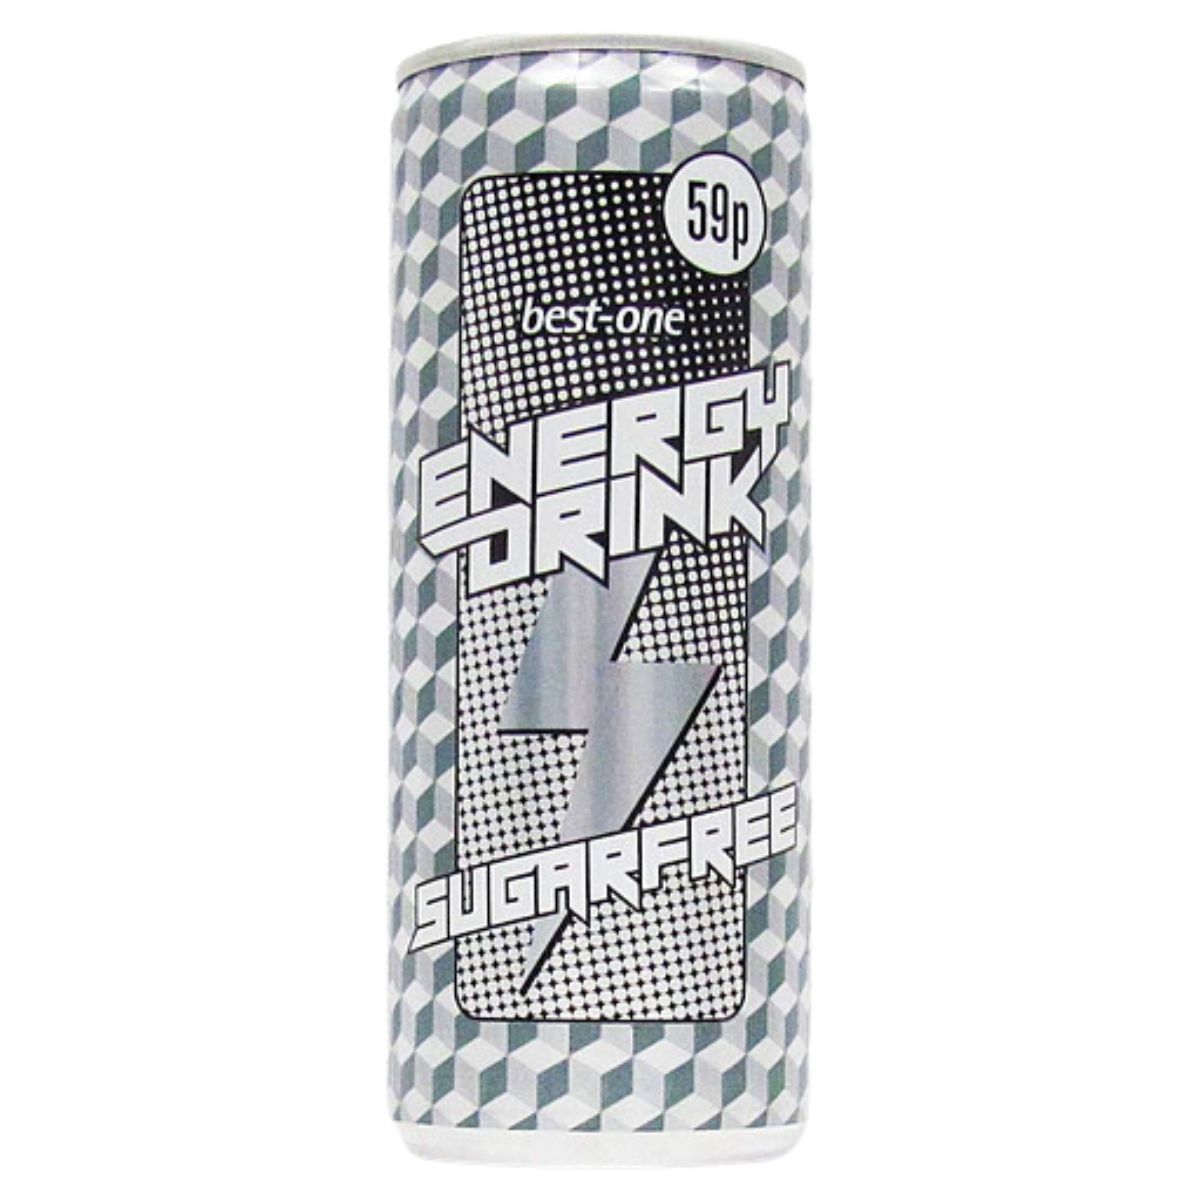 A can of Best One - Sugar Free Energy Drink - 250ml on a white background.